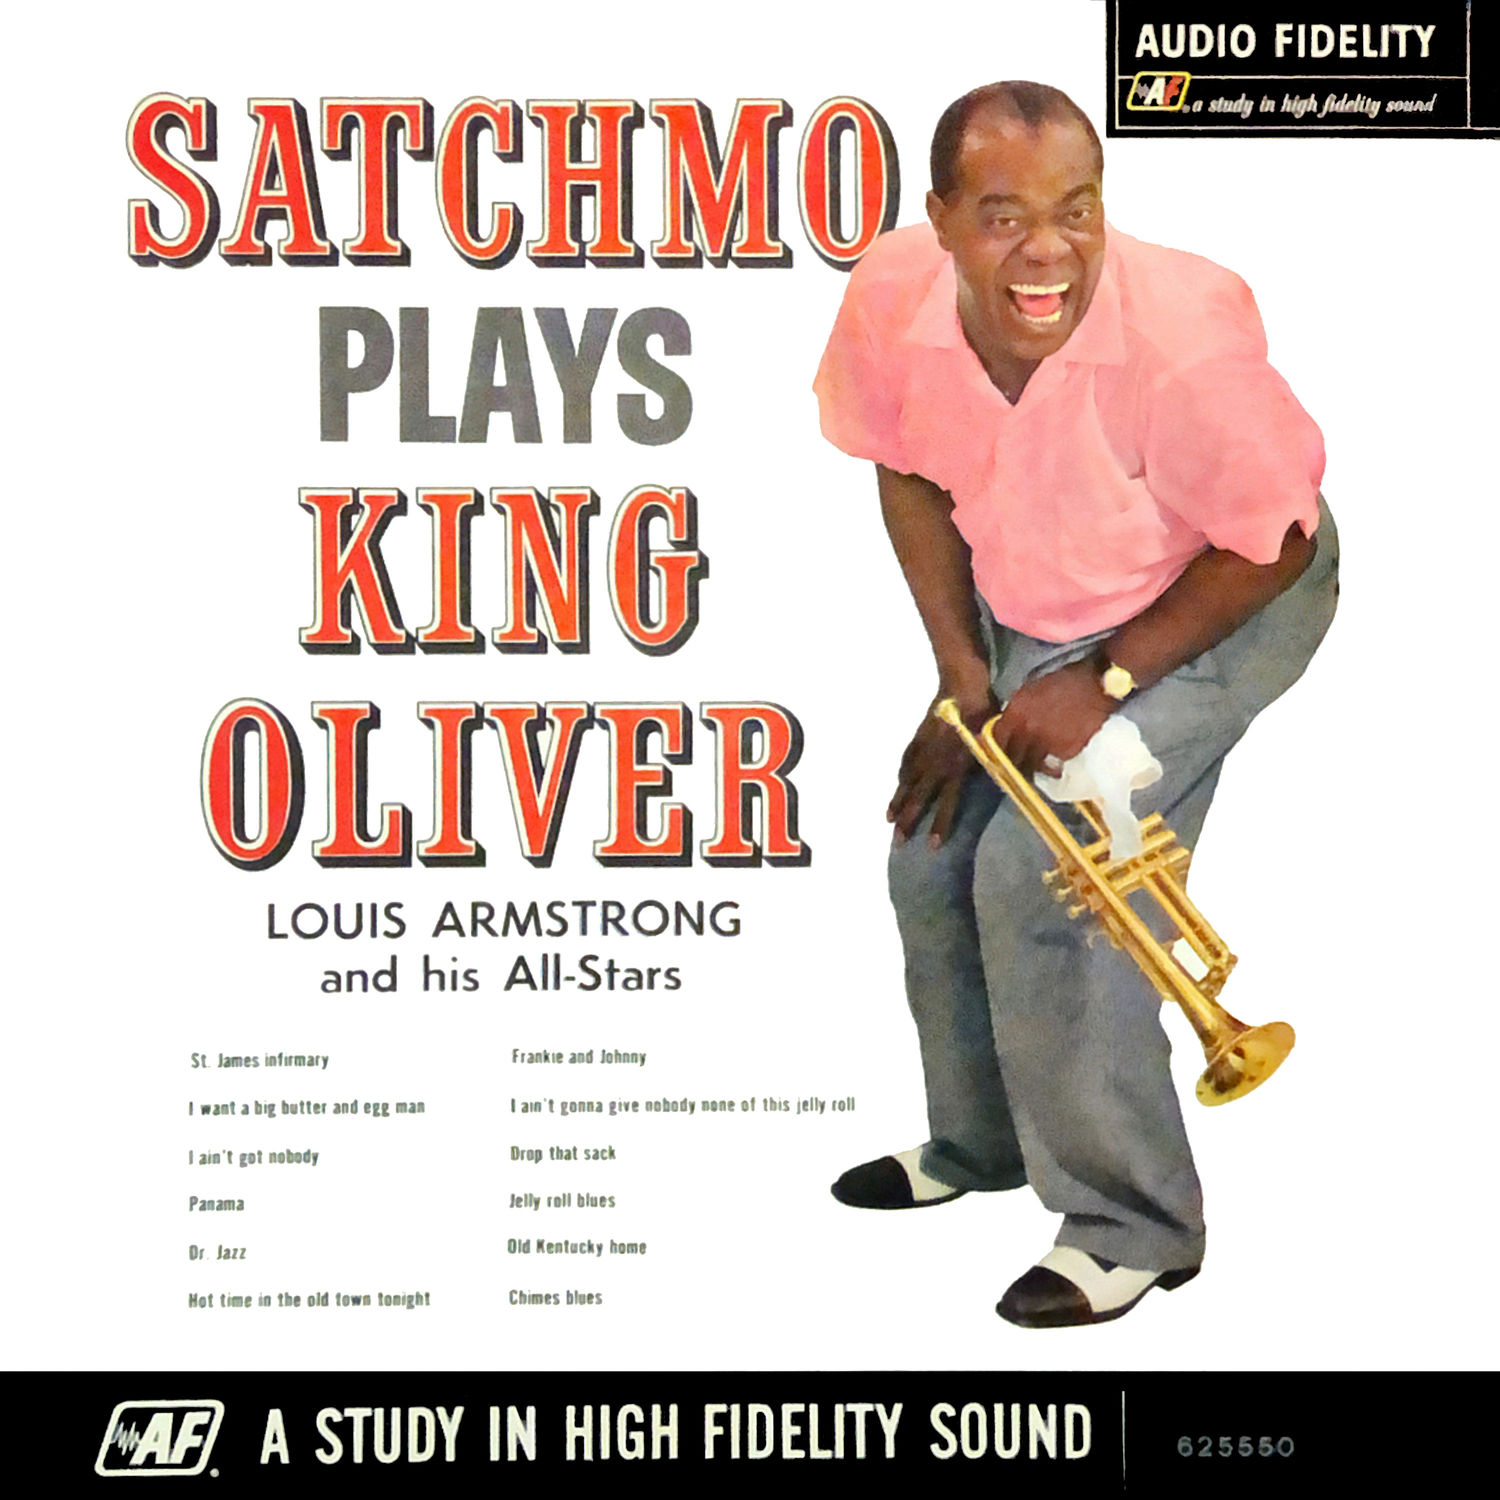 Louis Armstrong - Satchmo Plays King Oliver (1960/2019) [FLAC 24bit/96kHz]